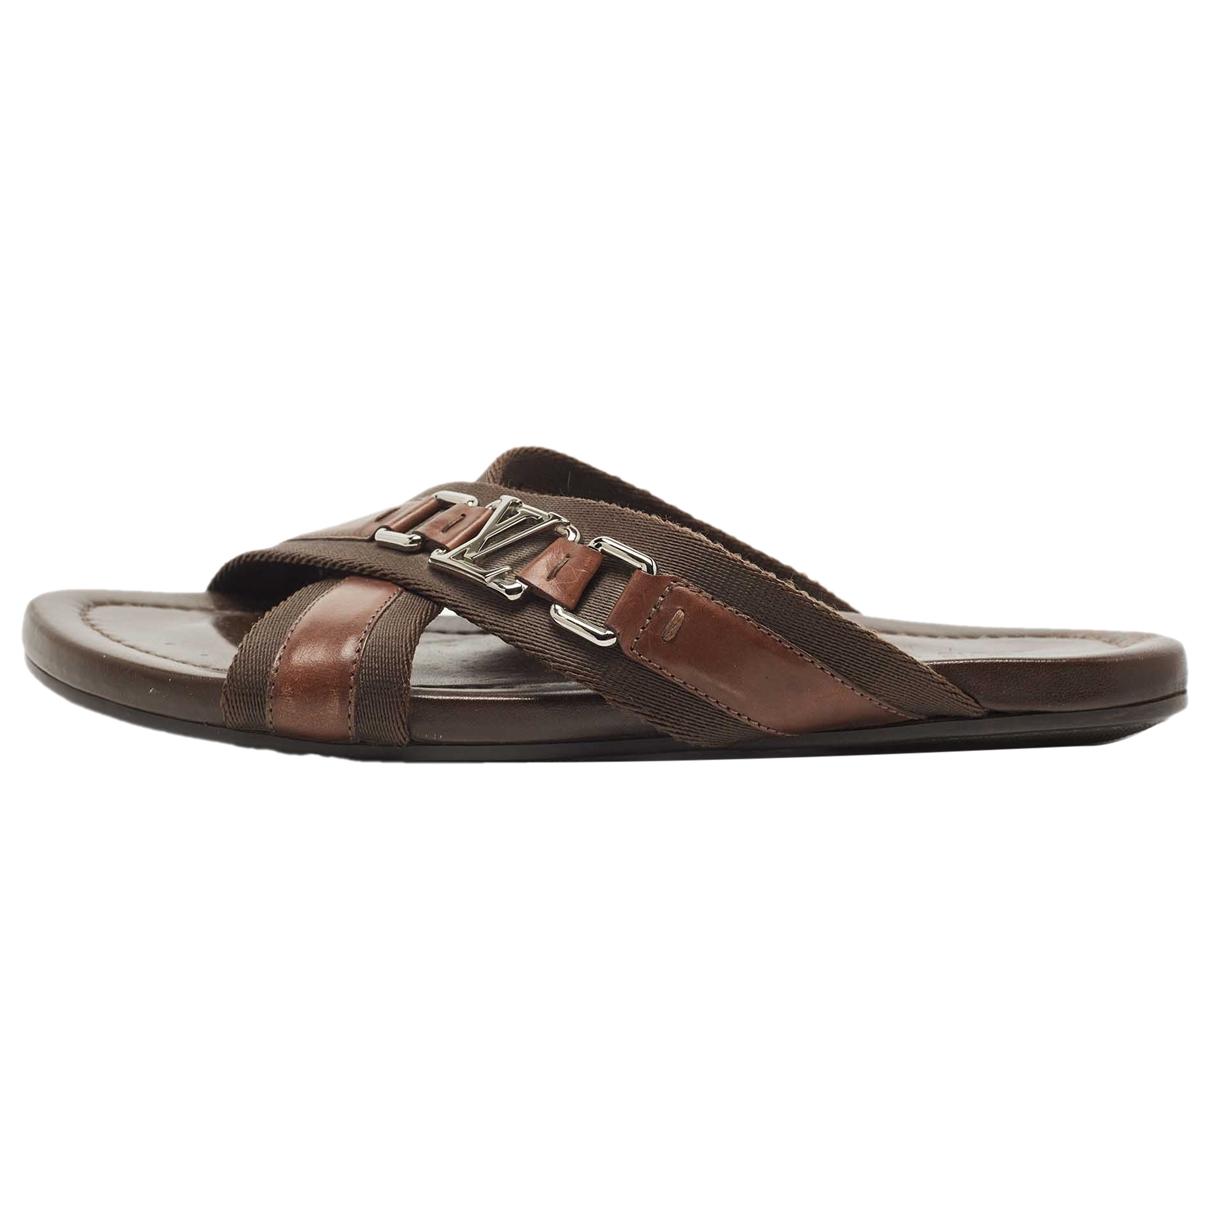 Leather sandals Louis Vuitton Brown size 42 EU in Leather - 35907631